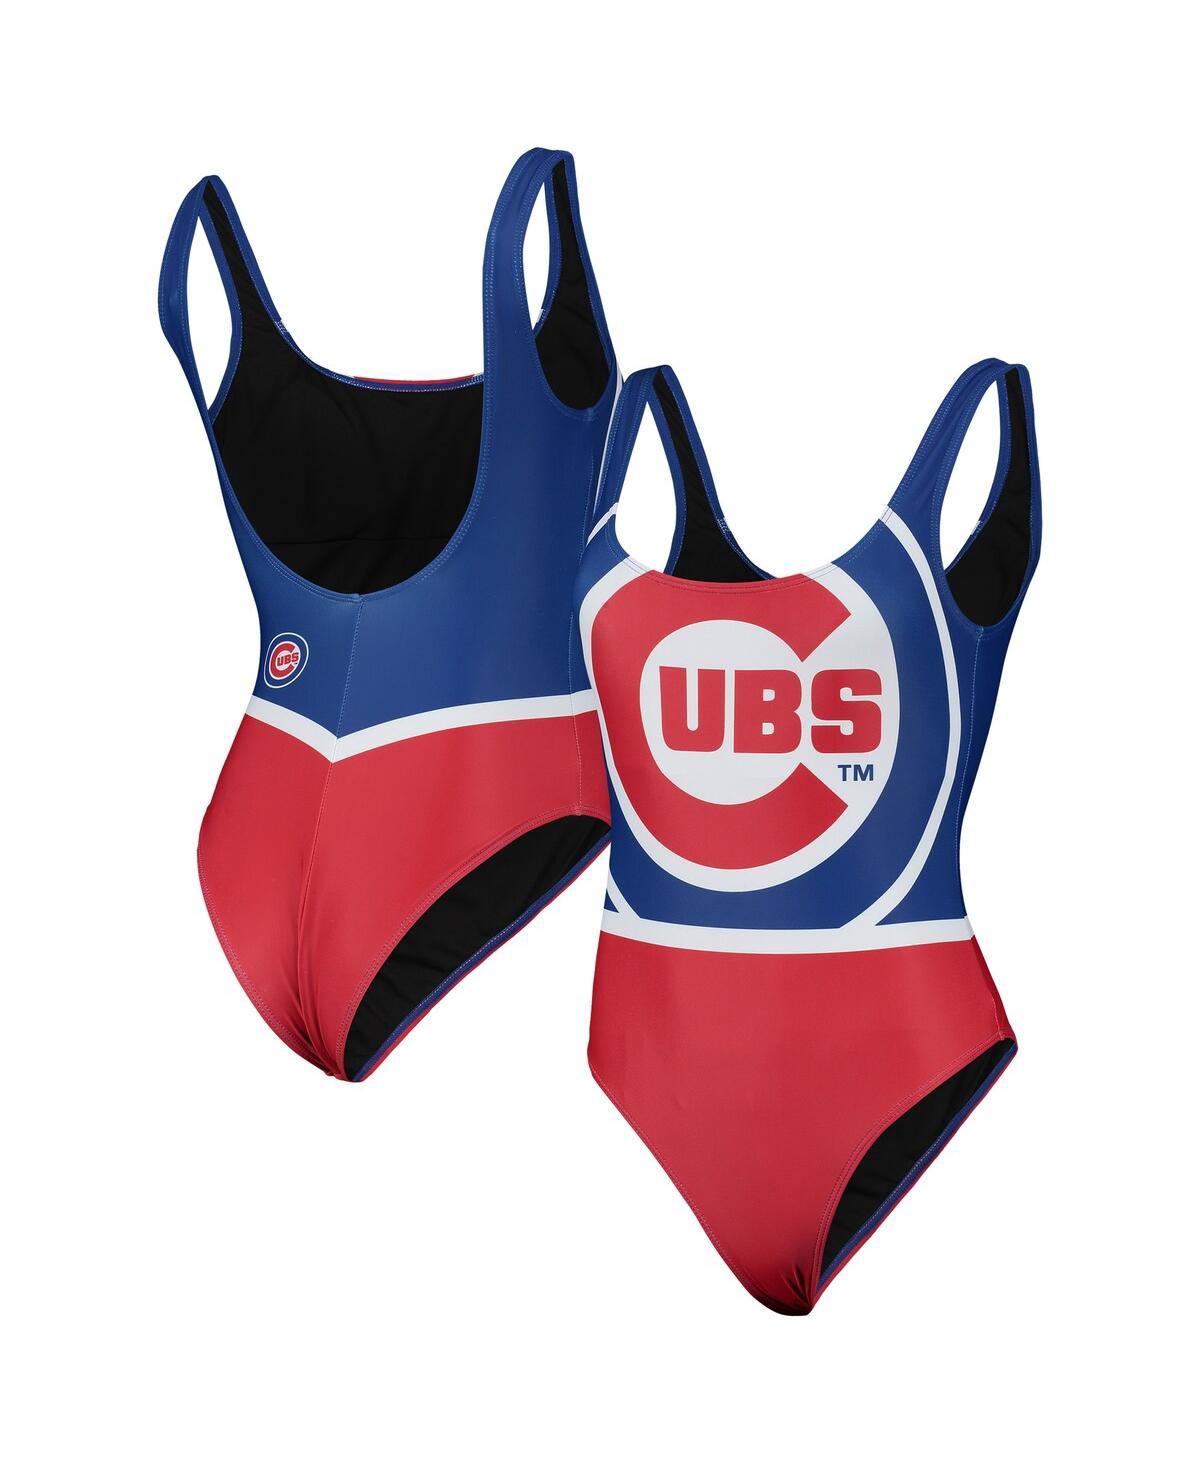 Women's Foco Royal Chicago Cubs Team One-Piece Bathing Suit - Royal